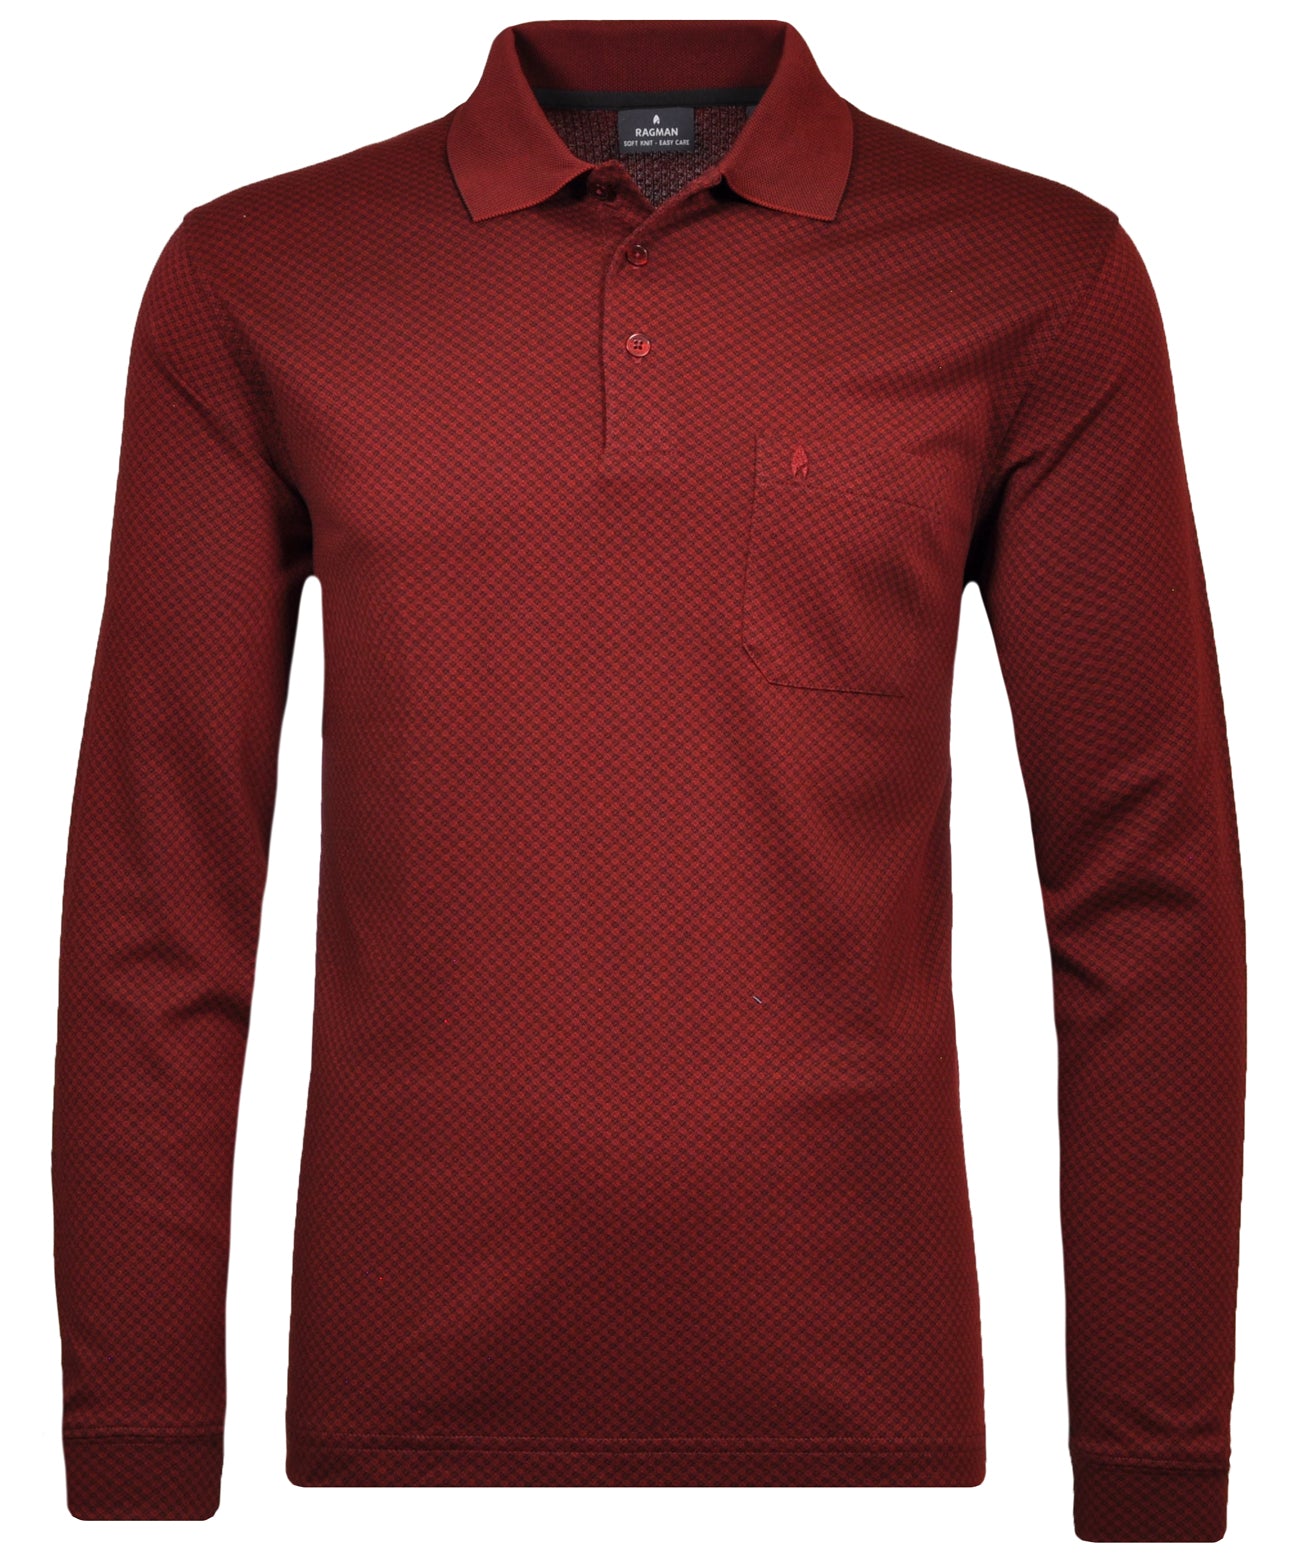 Polo longues manches ragman hommes grandes tailles